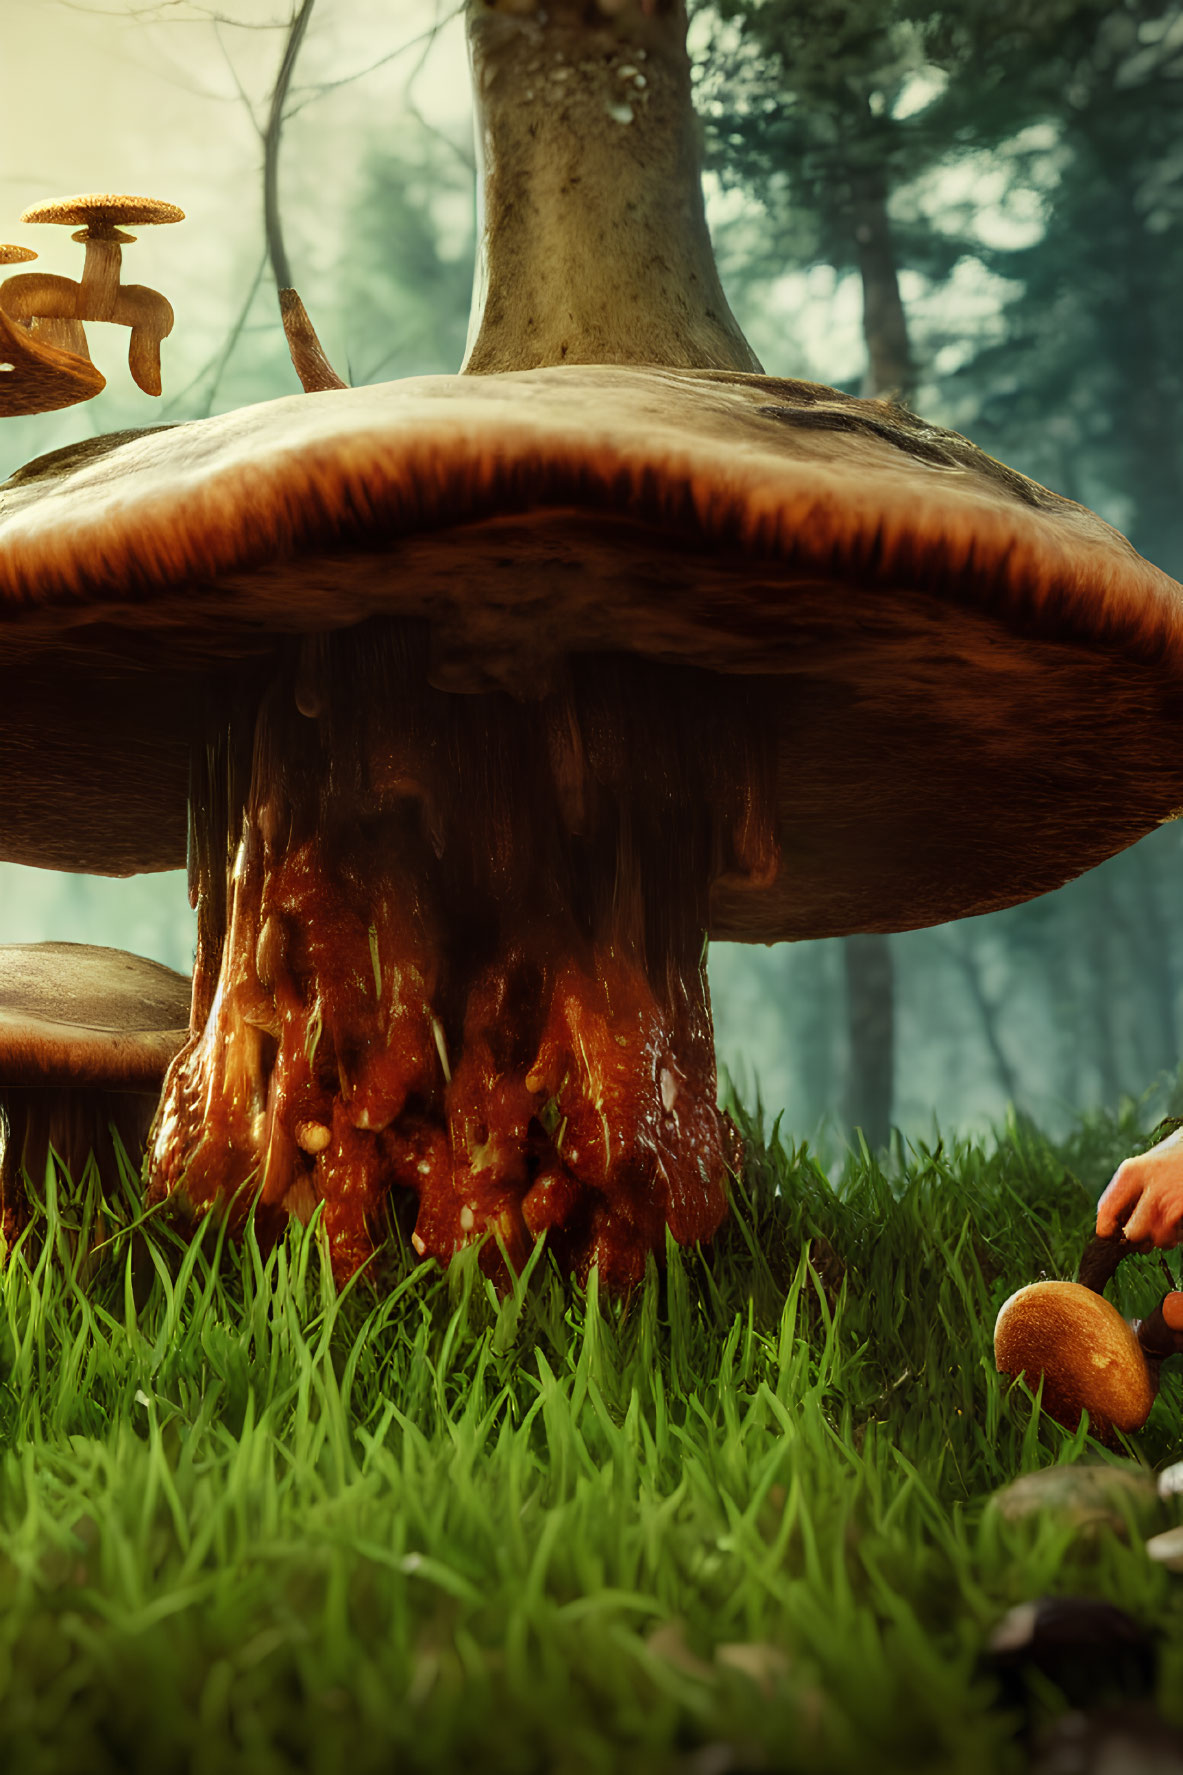 Enchanting forest scene with oversized mushrooms and lush greenery